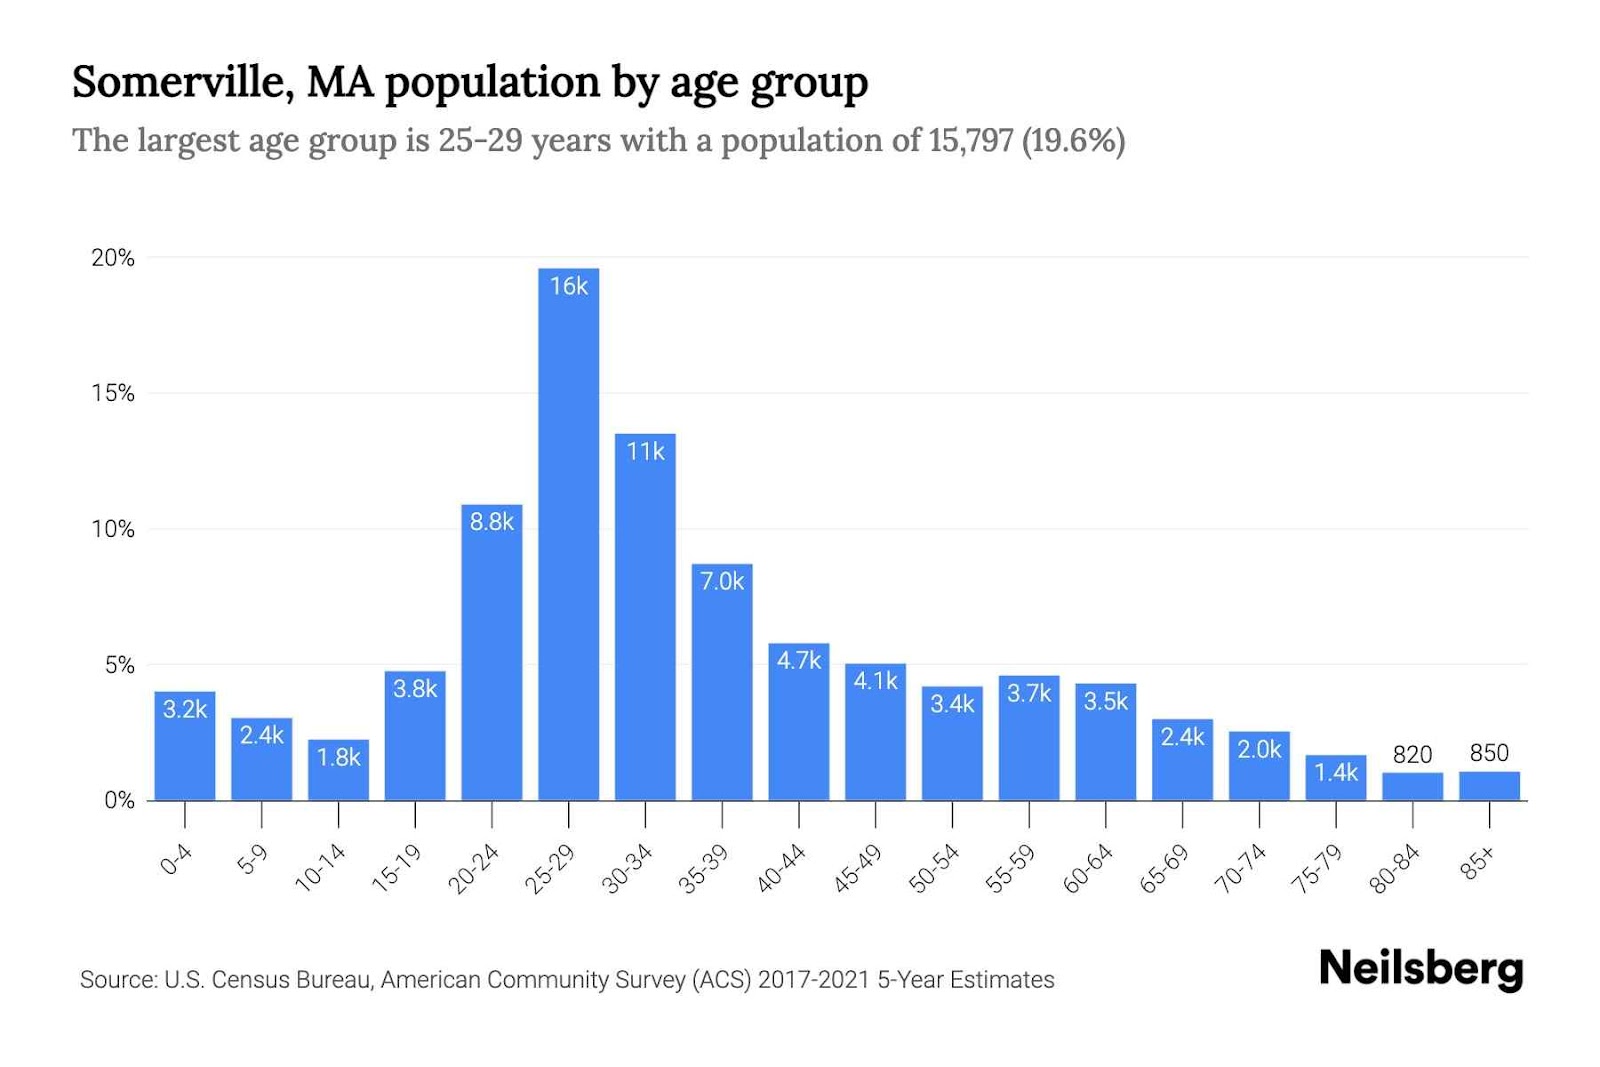 Somerville population by age group